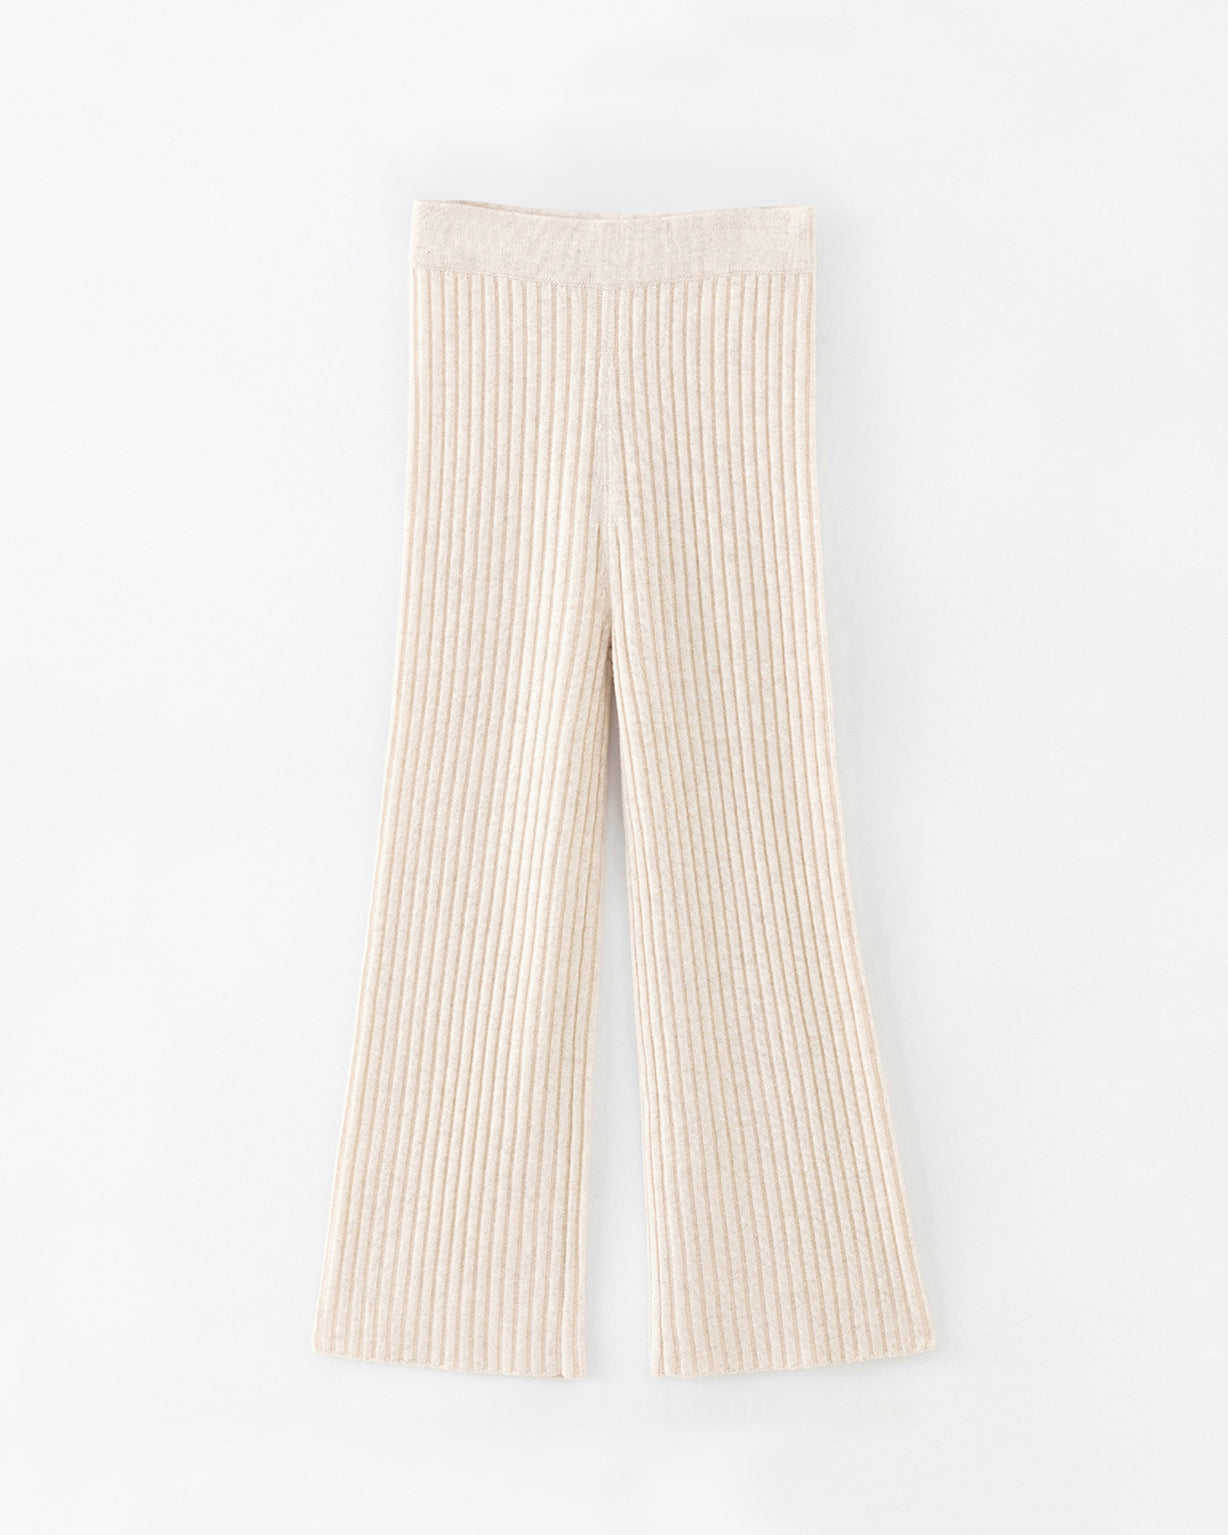 N.103 CASHMERE BLEND RIBBED WIDE LEG PANT - SHELL